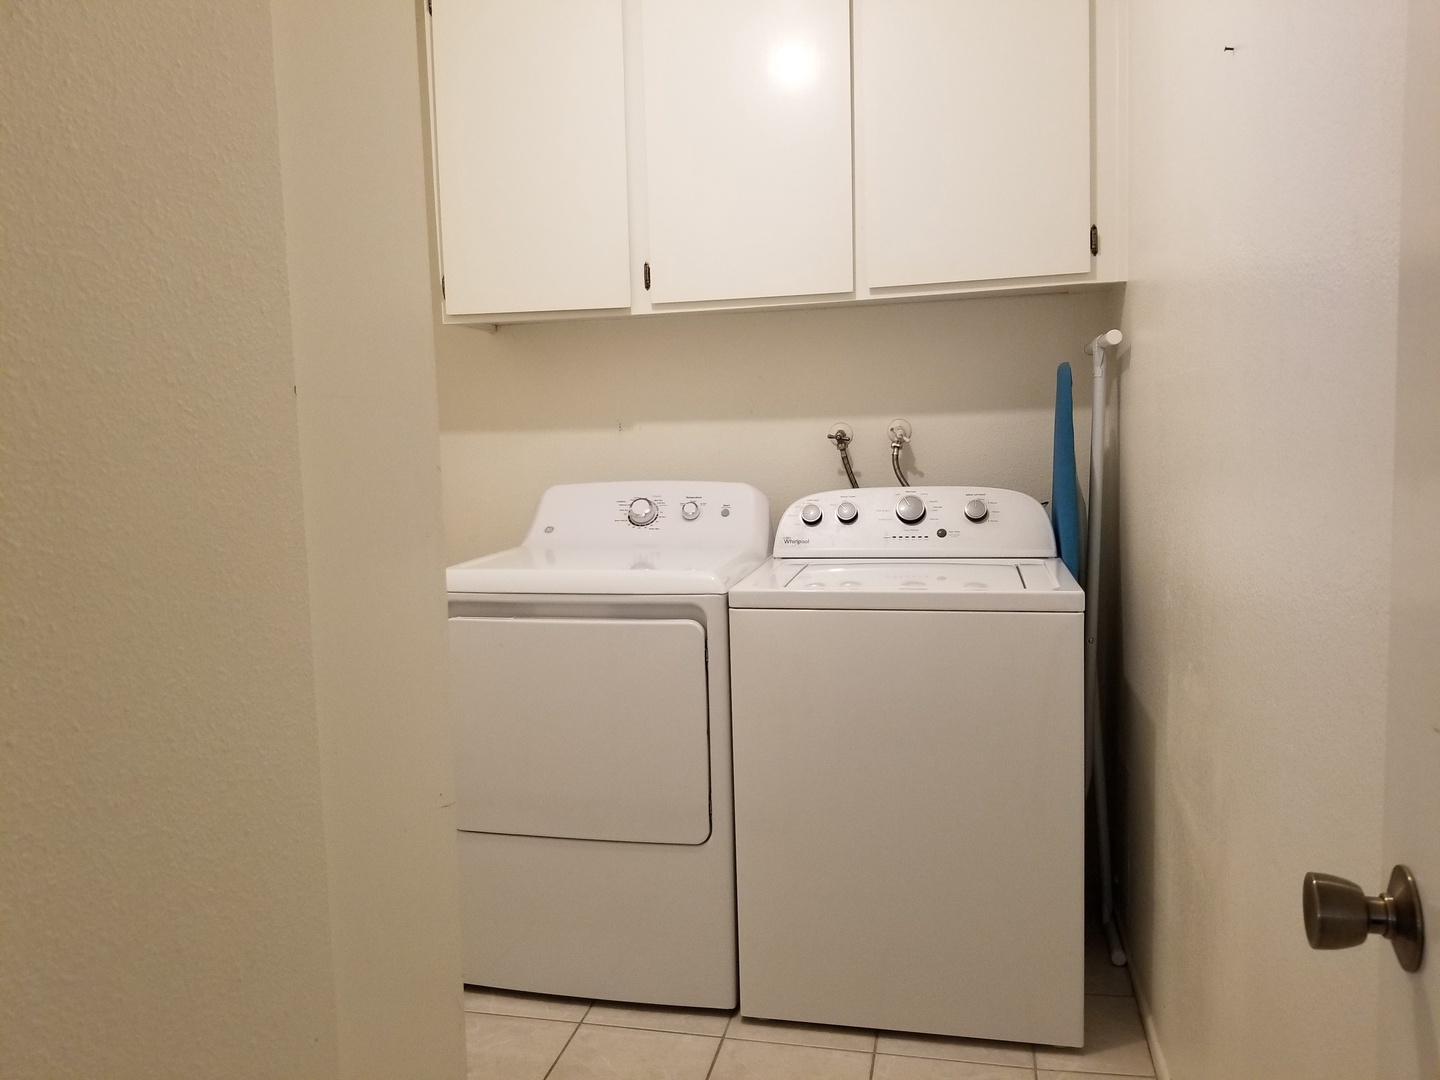 Laundry Room Leads to Garage